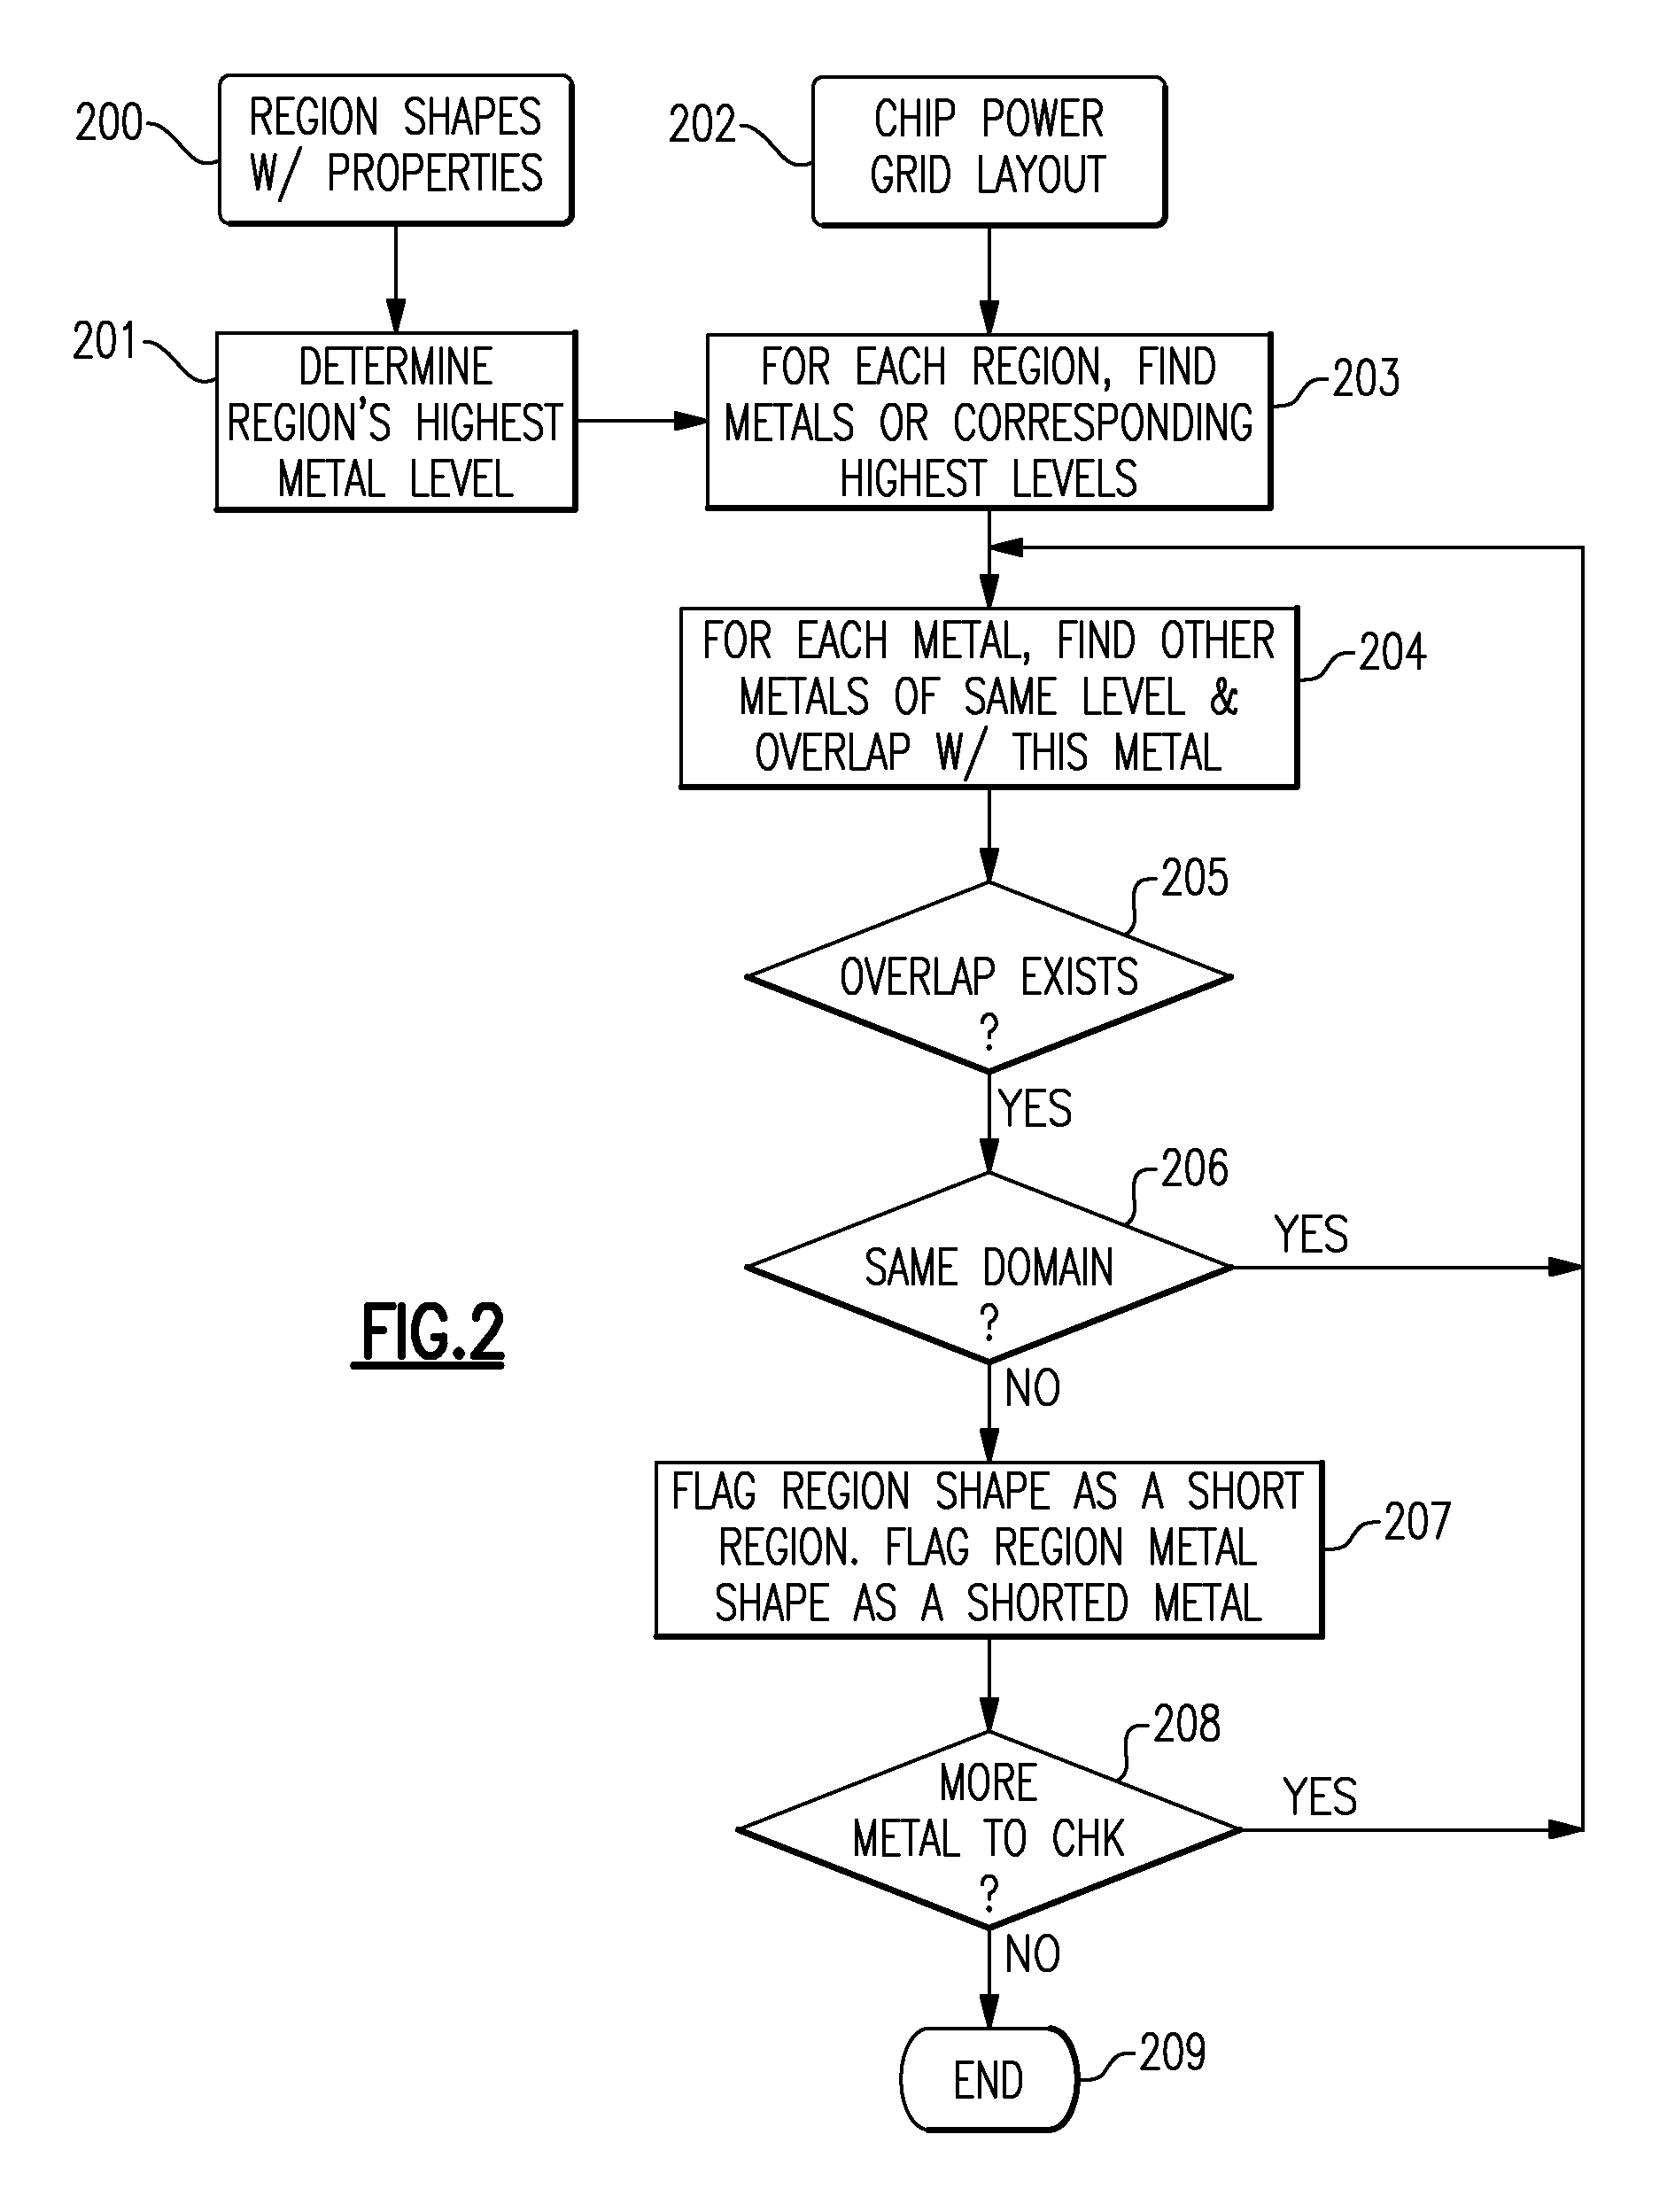 Method and Apparatus for Efficient Power Region Checking of Multi-Supply Voltage Microprocessors